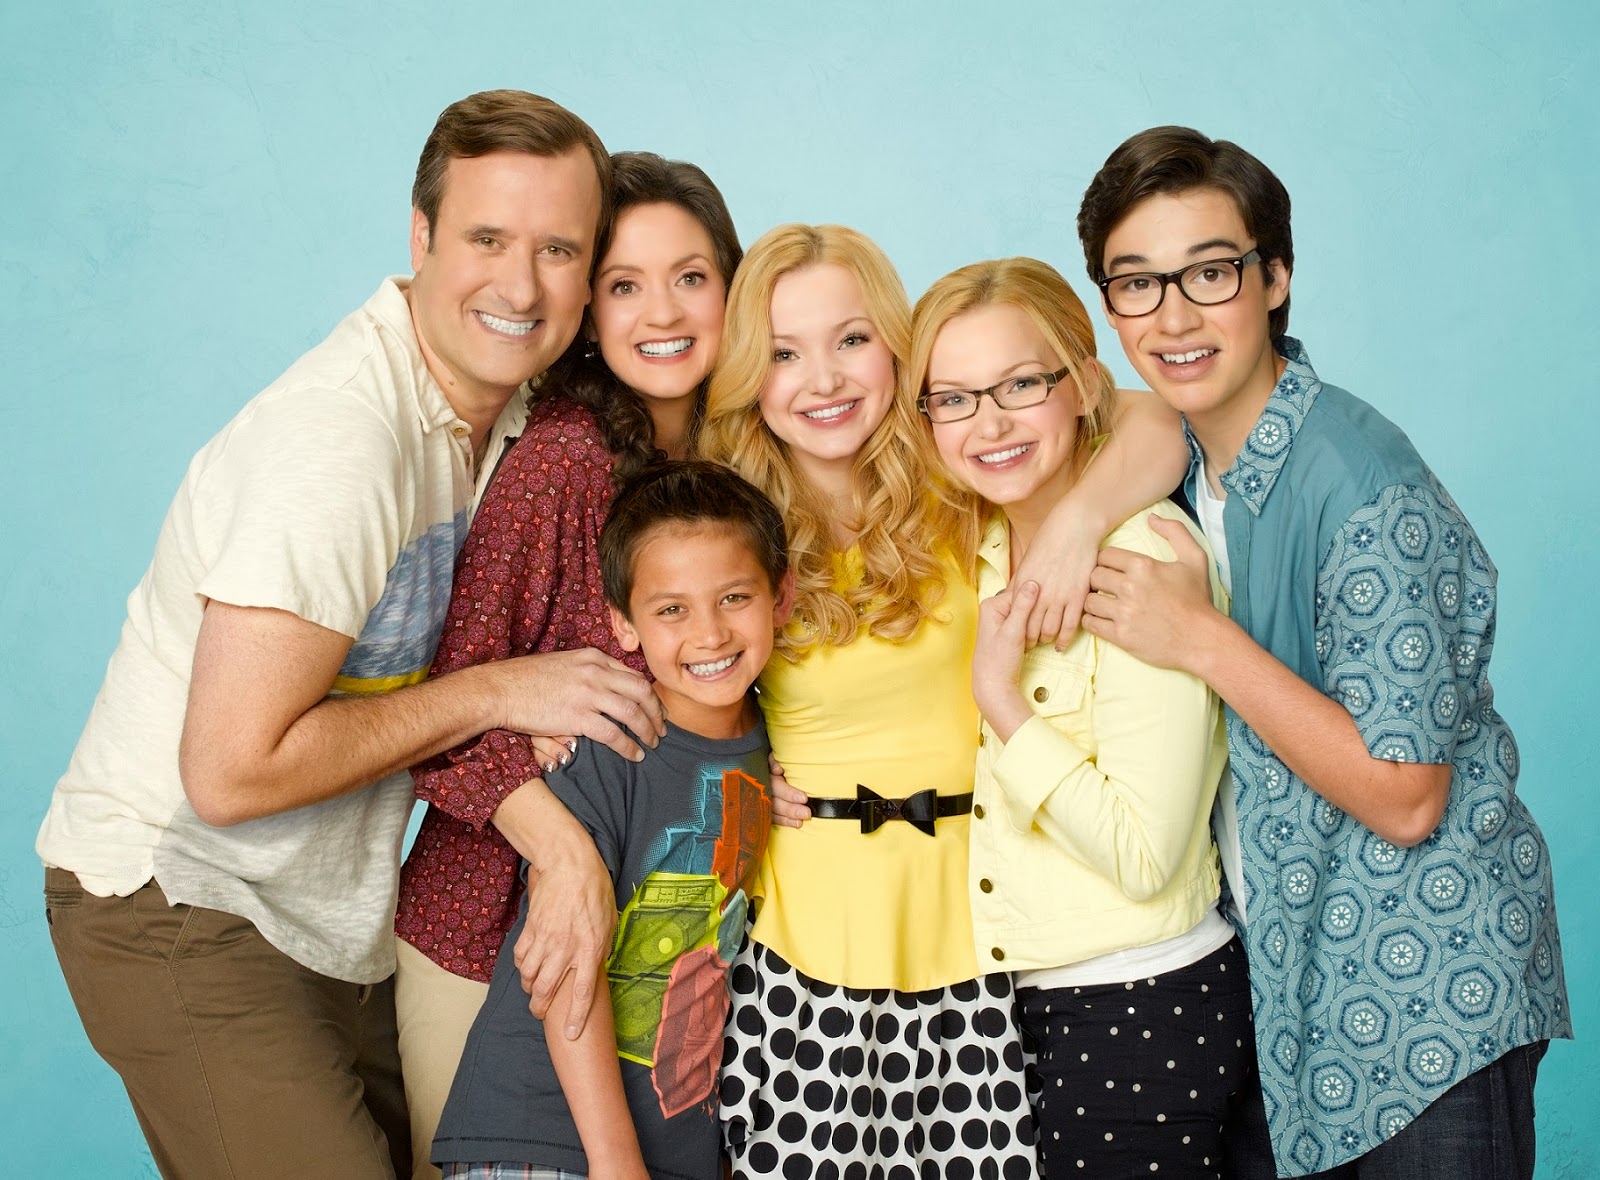 Disney Channel's "Liv and Maddie" - wide 1